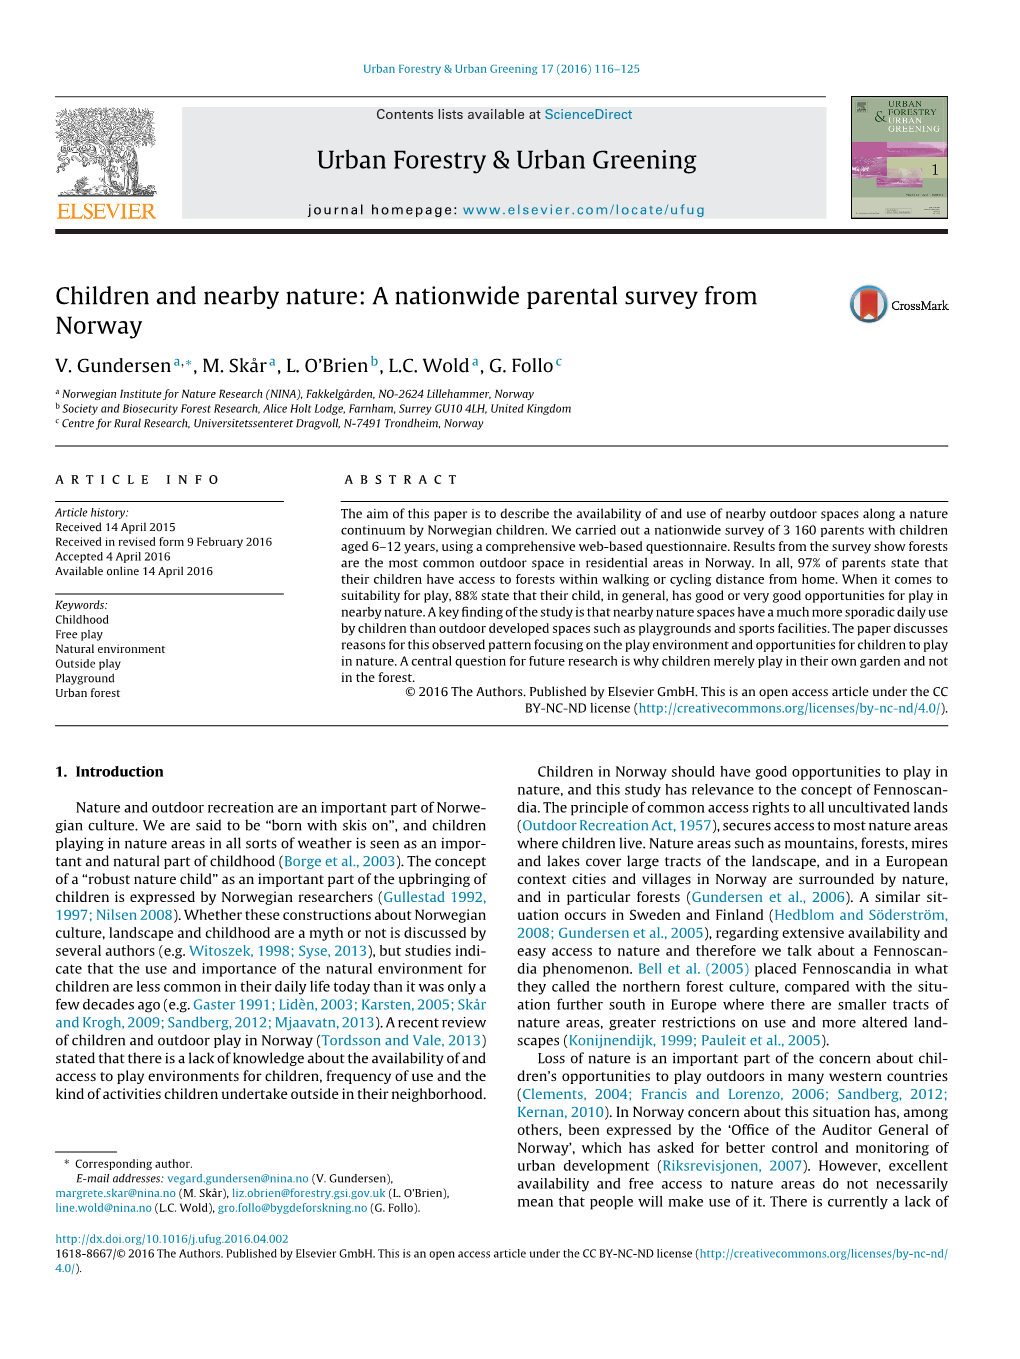 Children and Nearby Nature: a Nationwide Parental Survey from Norway